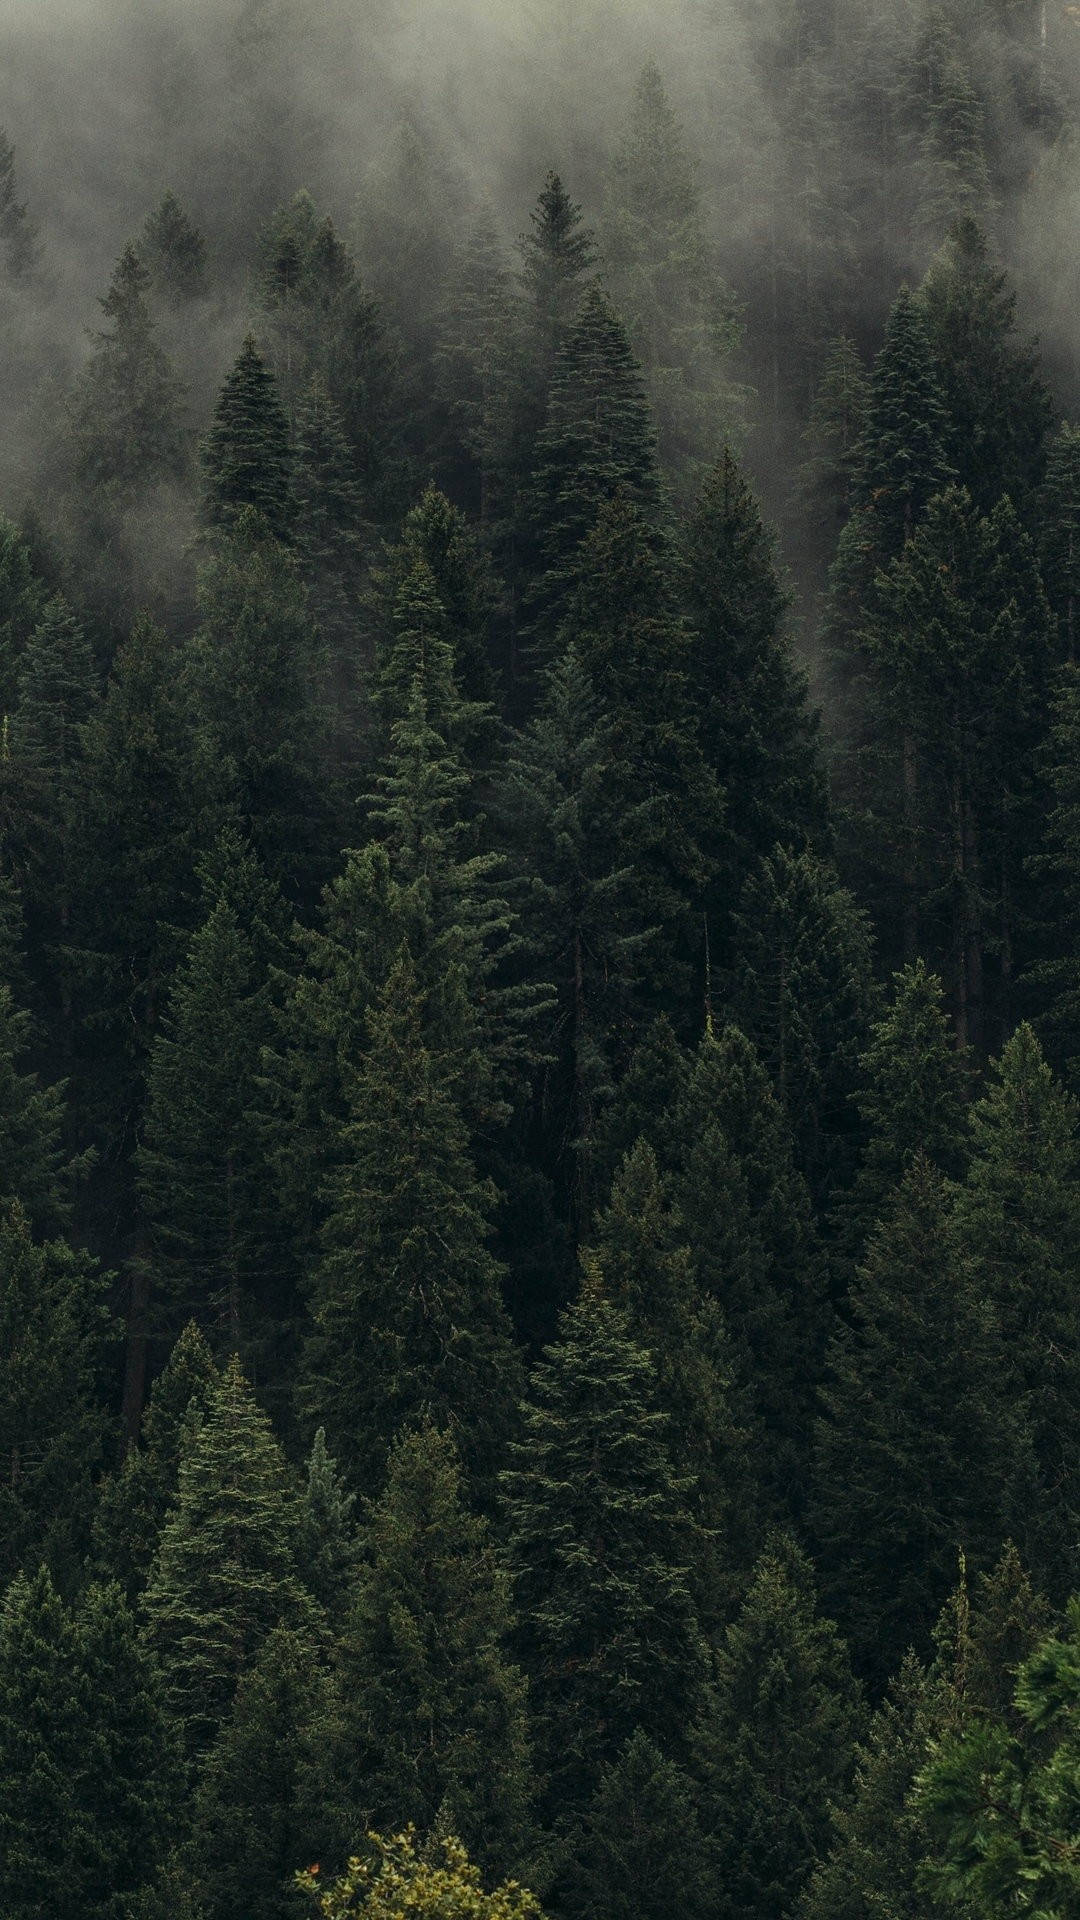 Foggy Pine Forest Iphone Background